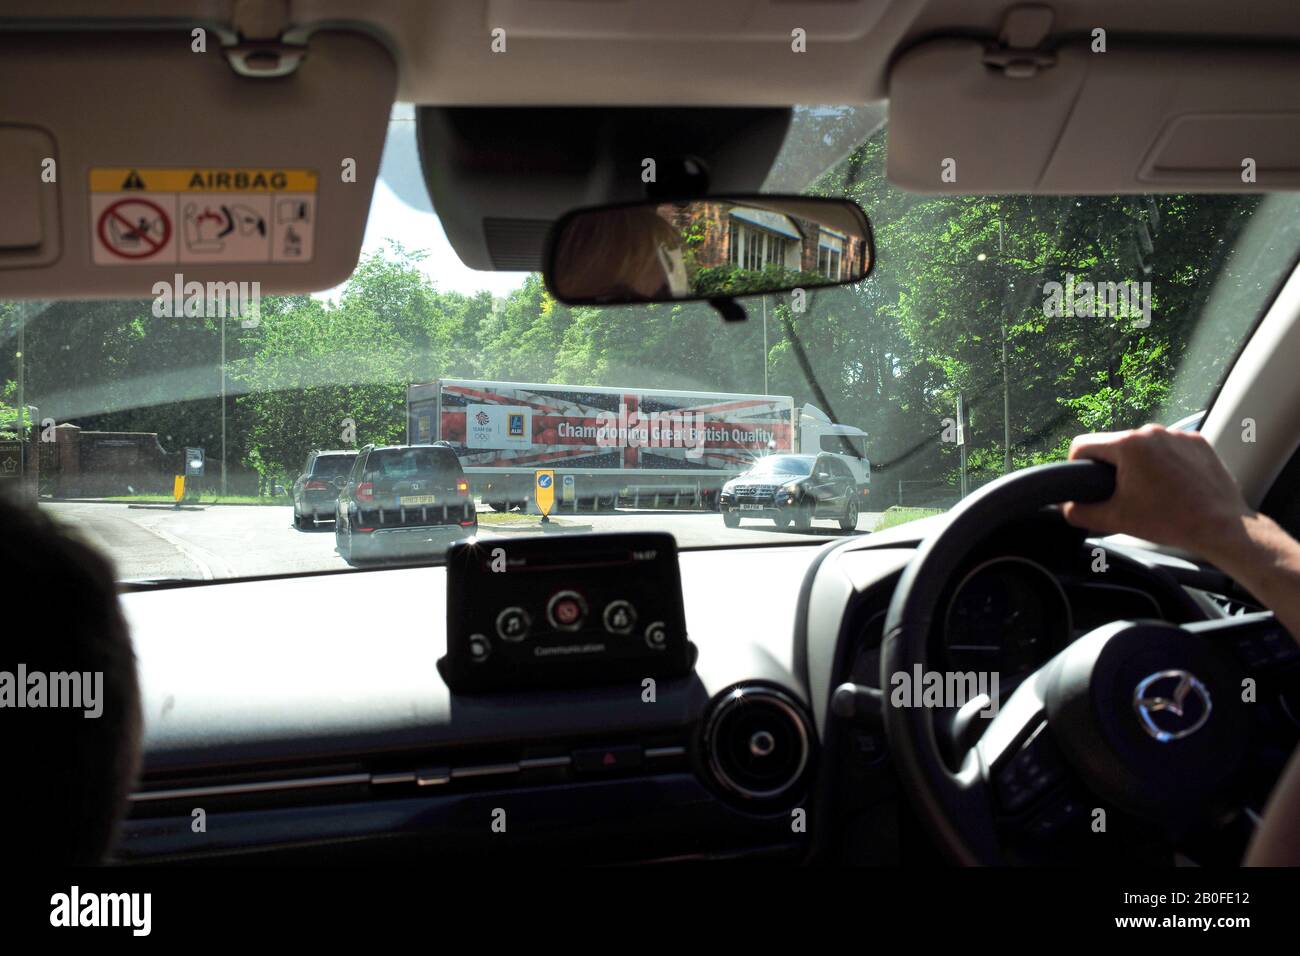 A view of a Aldi Supermarket truck with a Union Jack flag on the trailer advertising British quality seen from the view of inside a car. Stock Photo